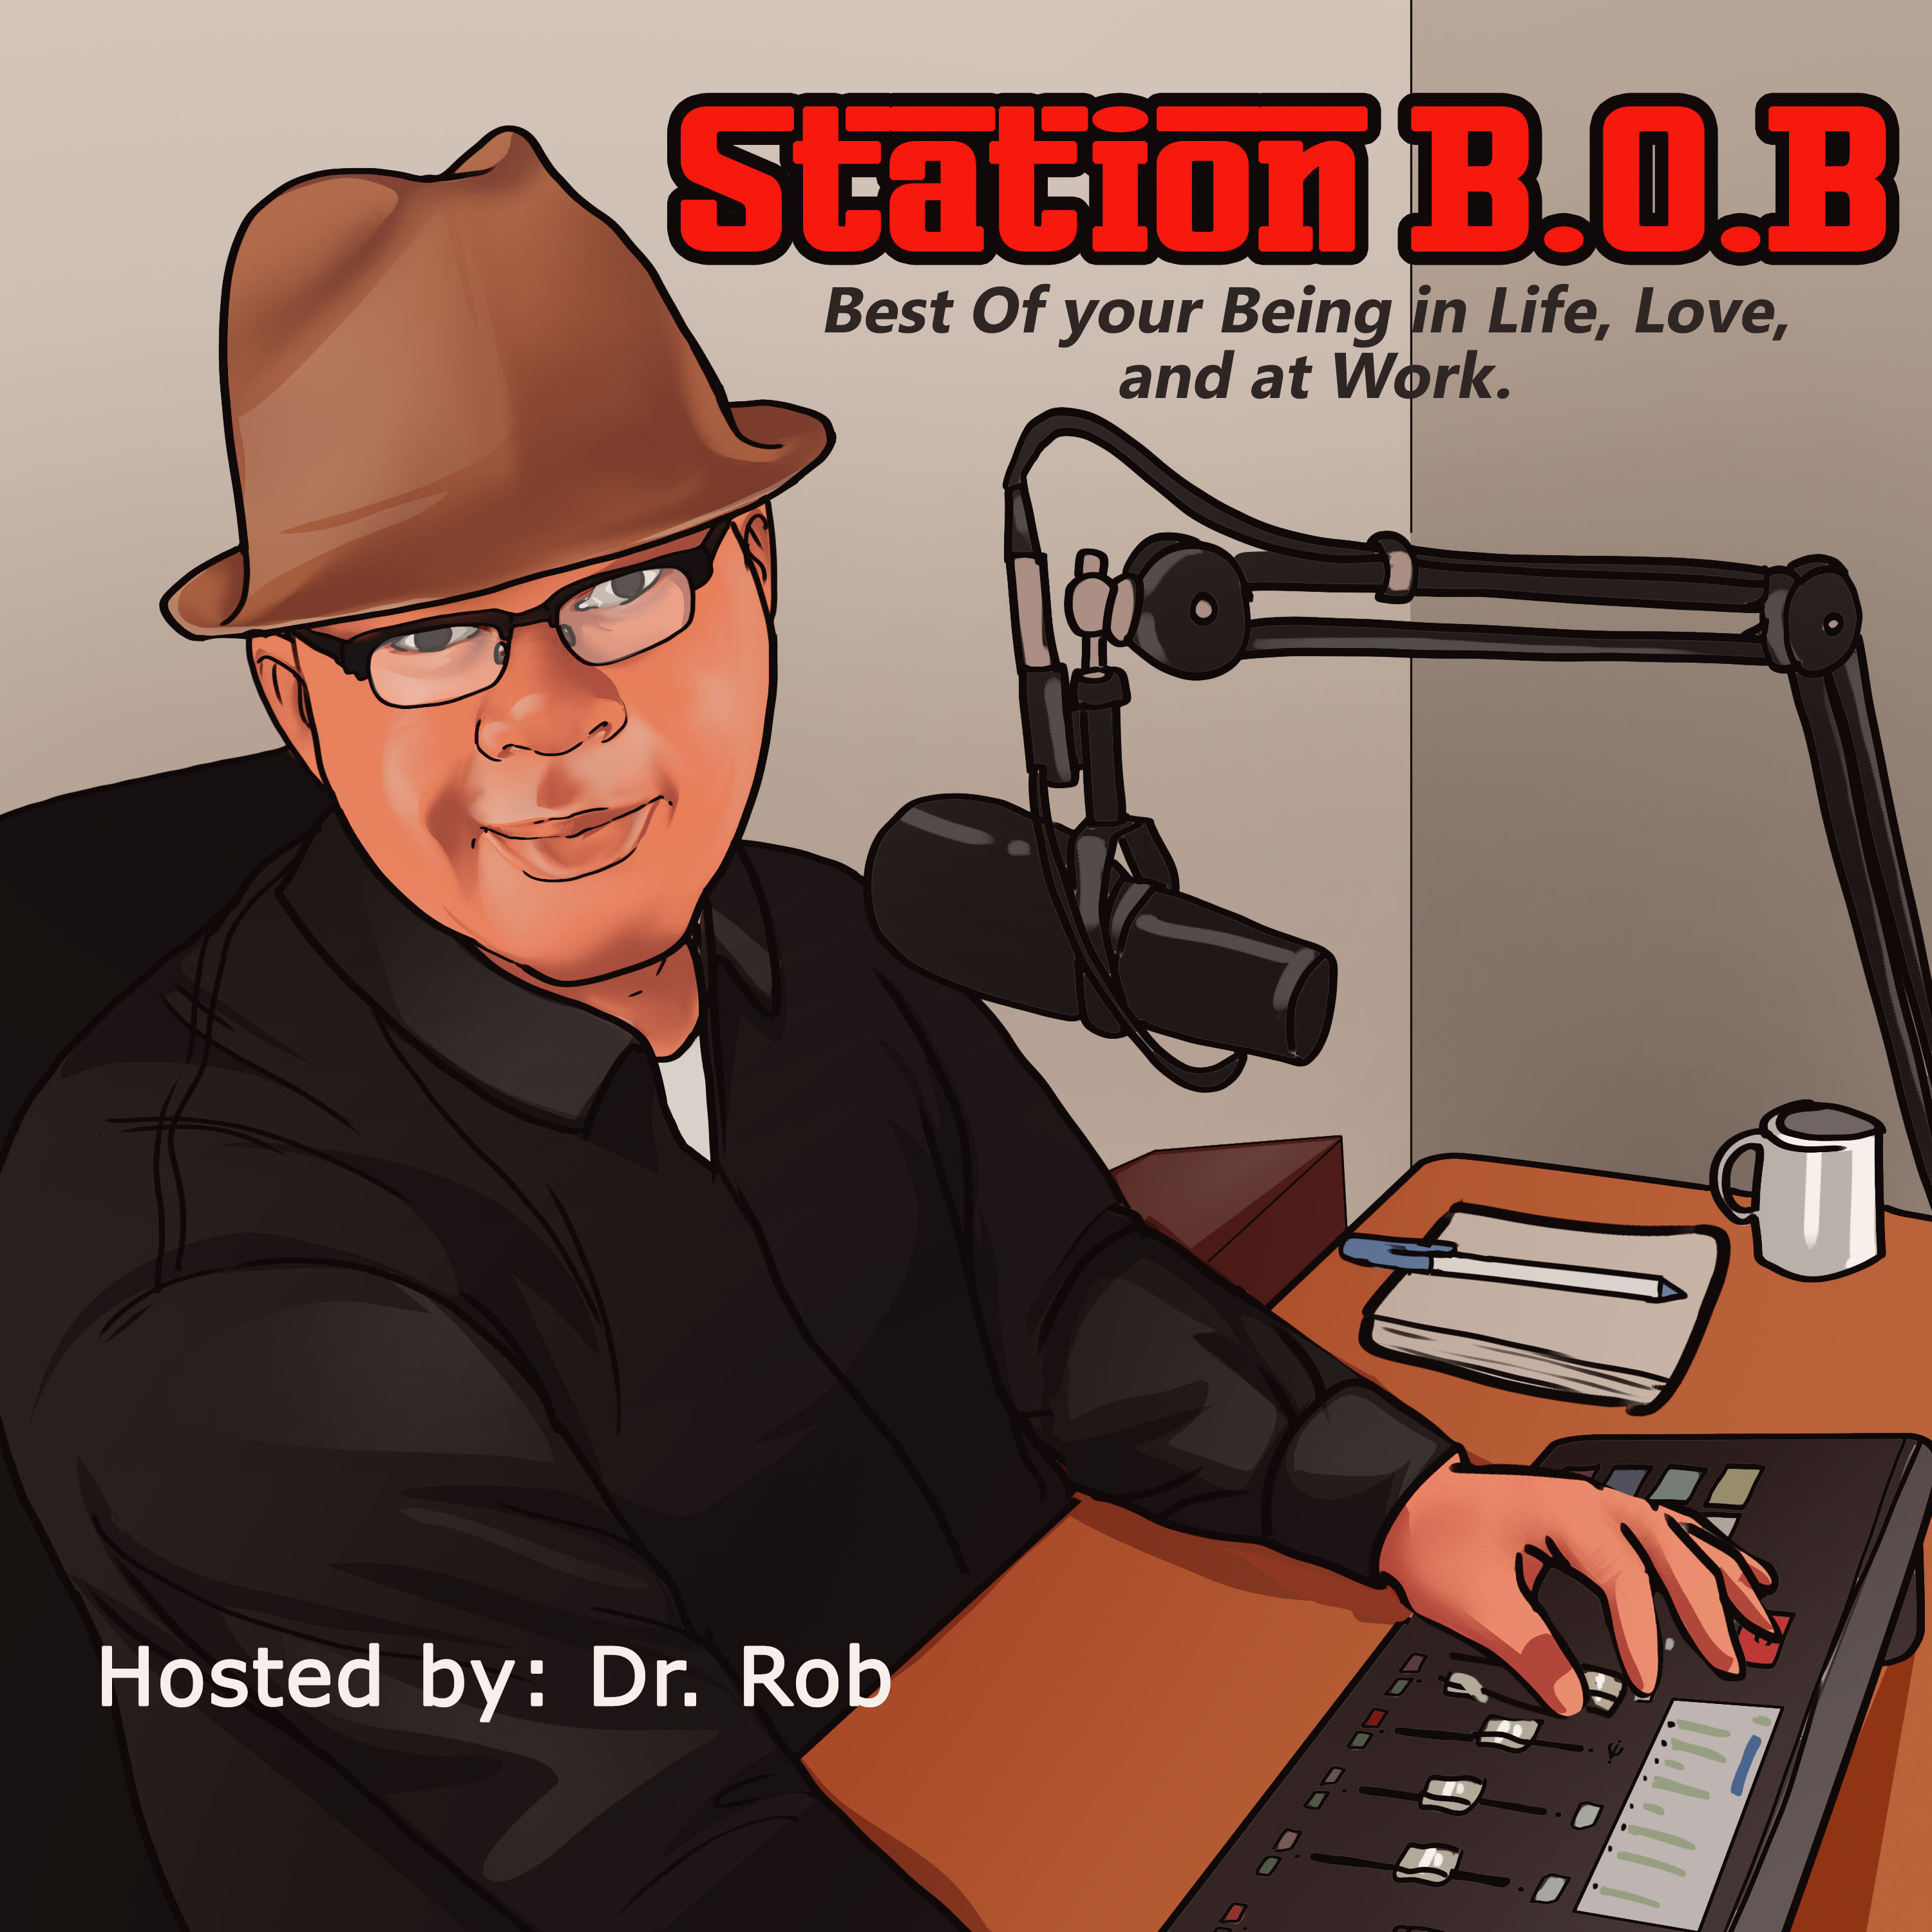 Station B.O.B. Where you listen to learn how to become the Best Of your Being in life, love and work.